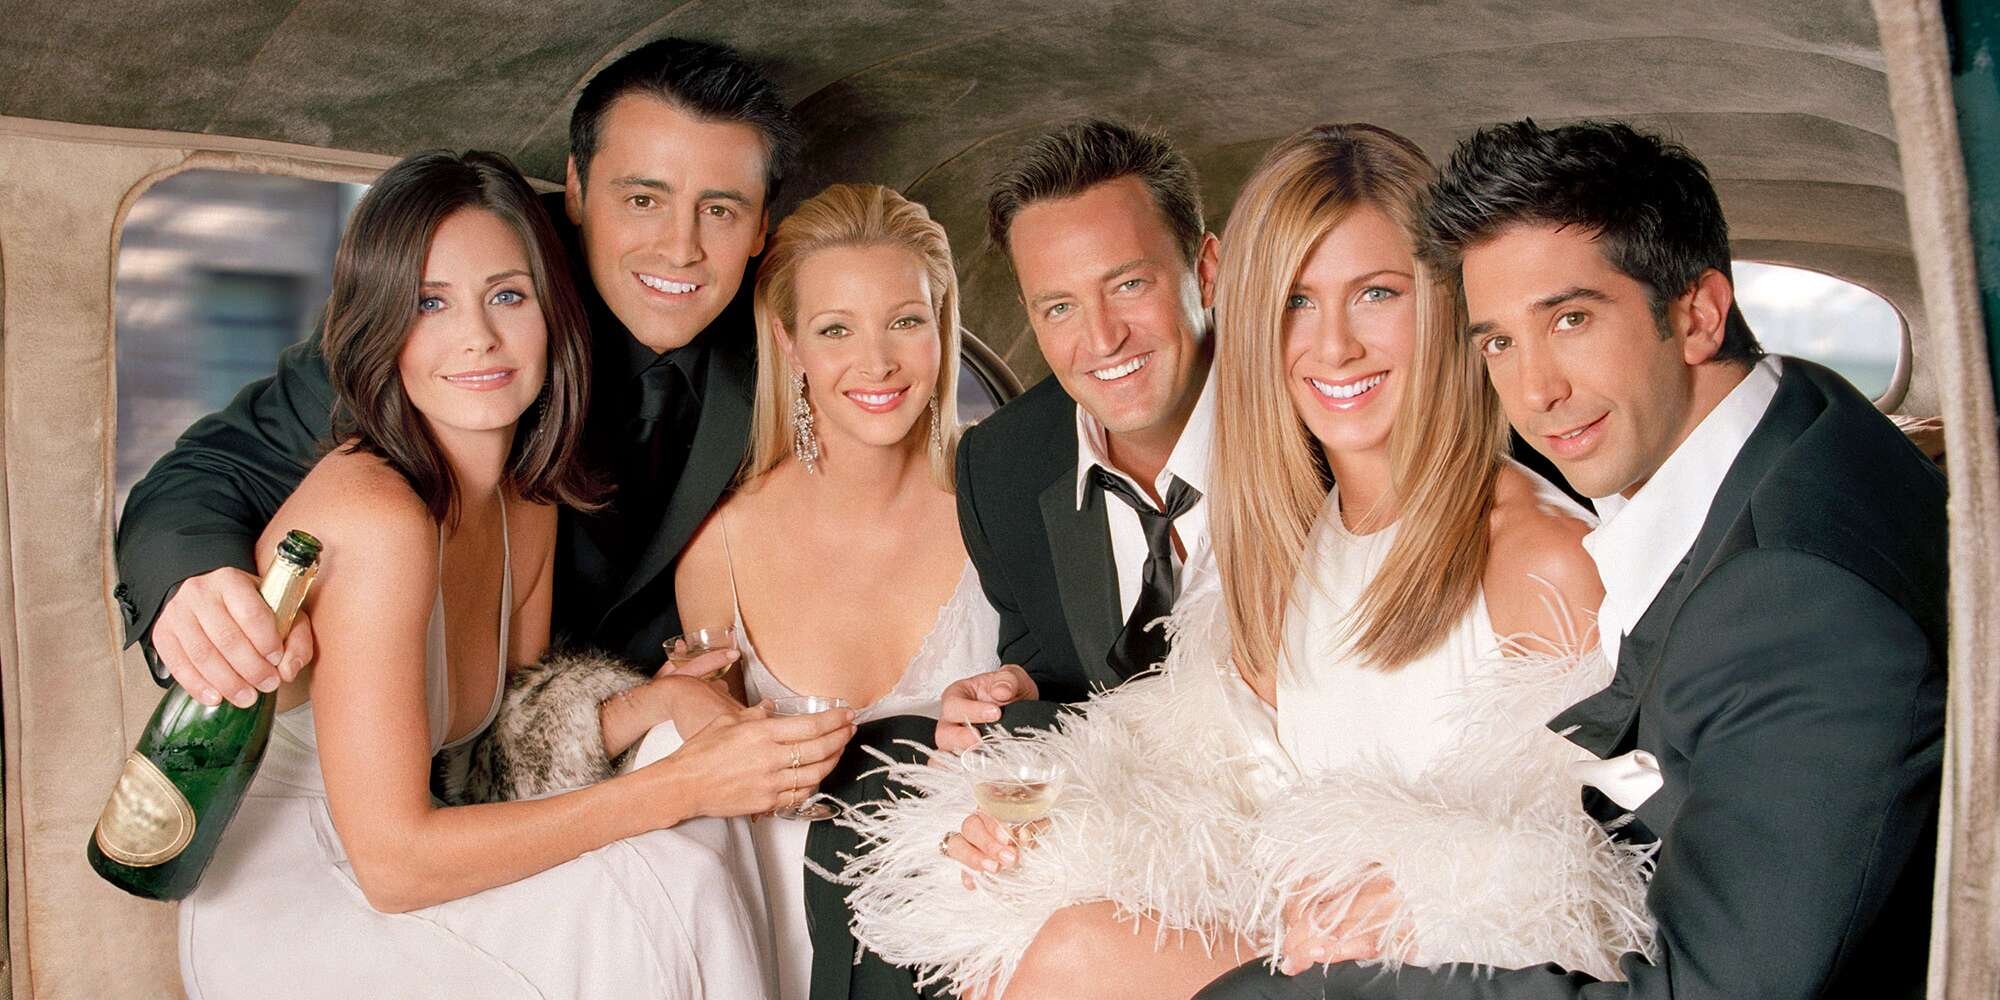 Matthew Perry explains why Friends continues to gain fans 25 years later